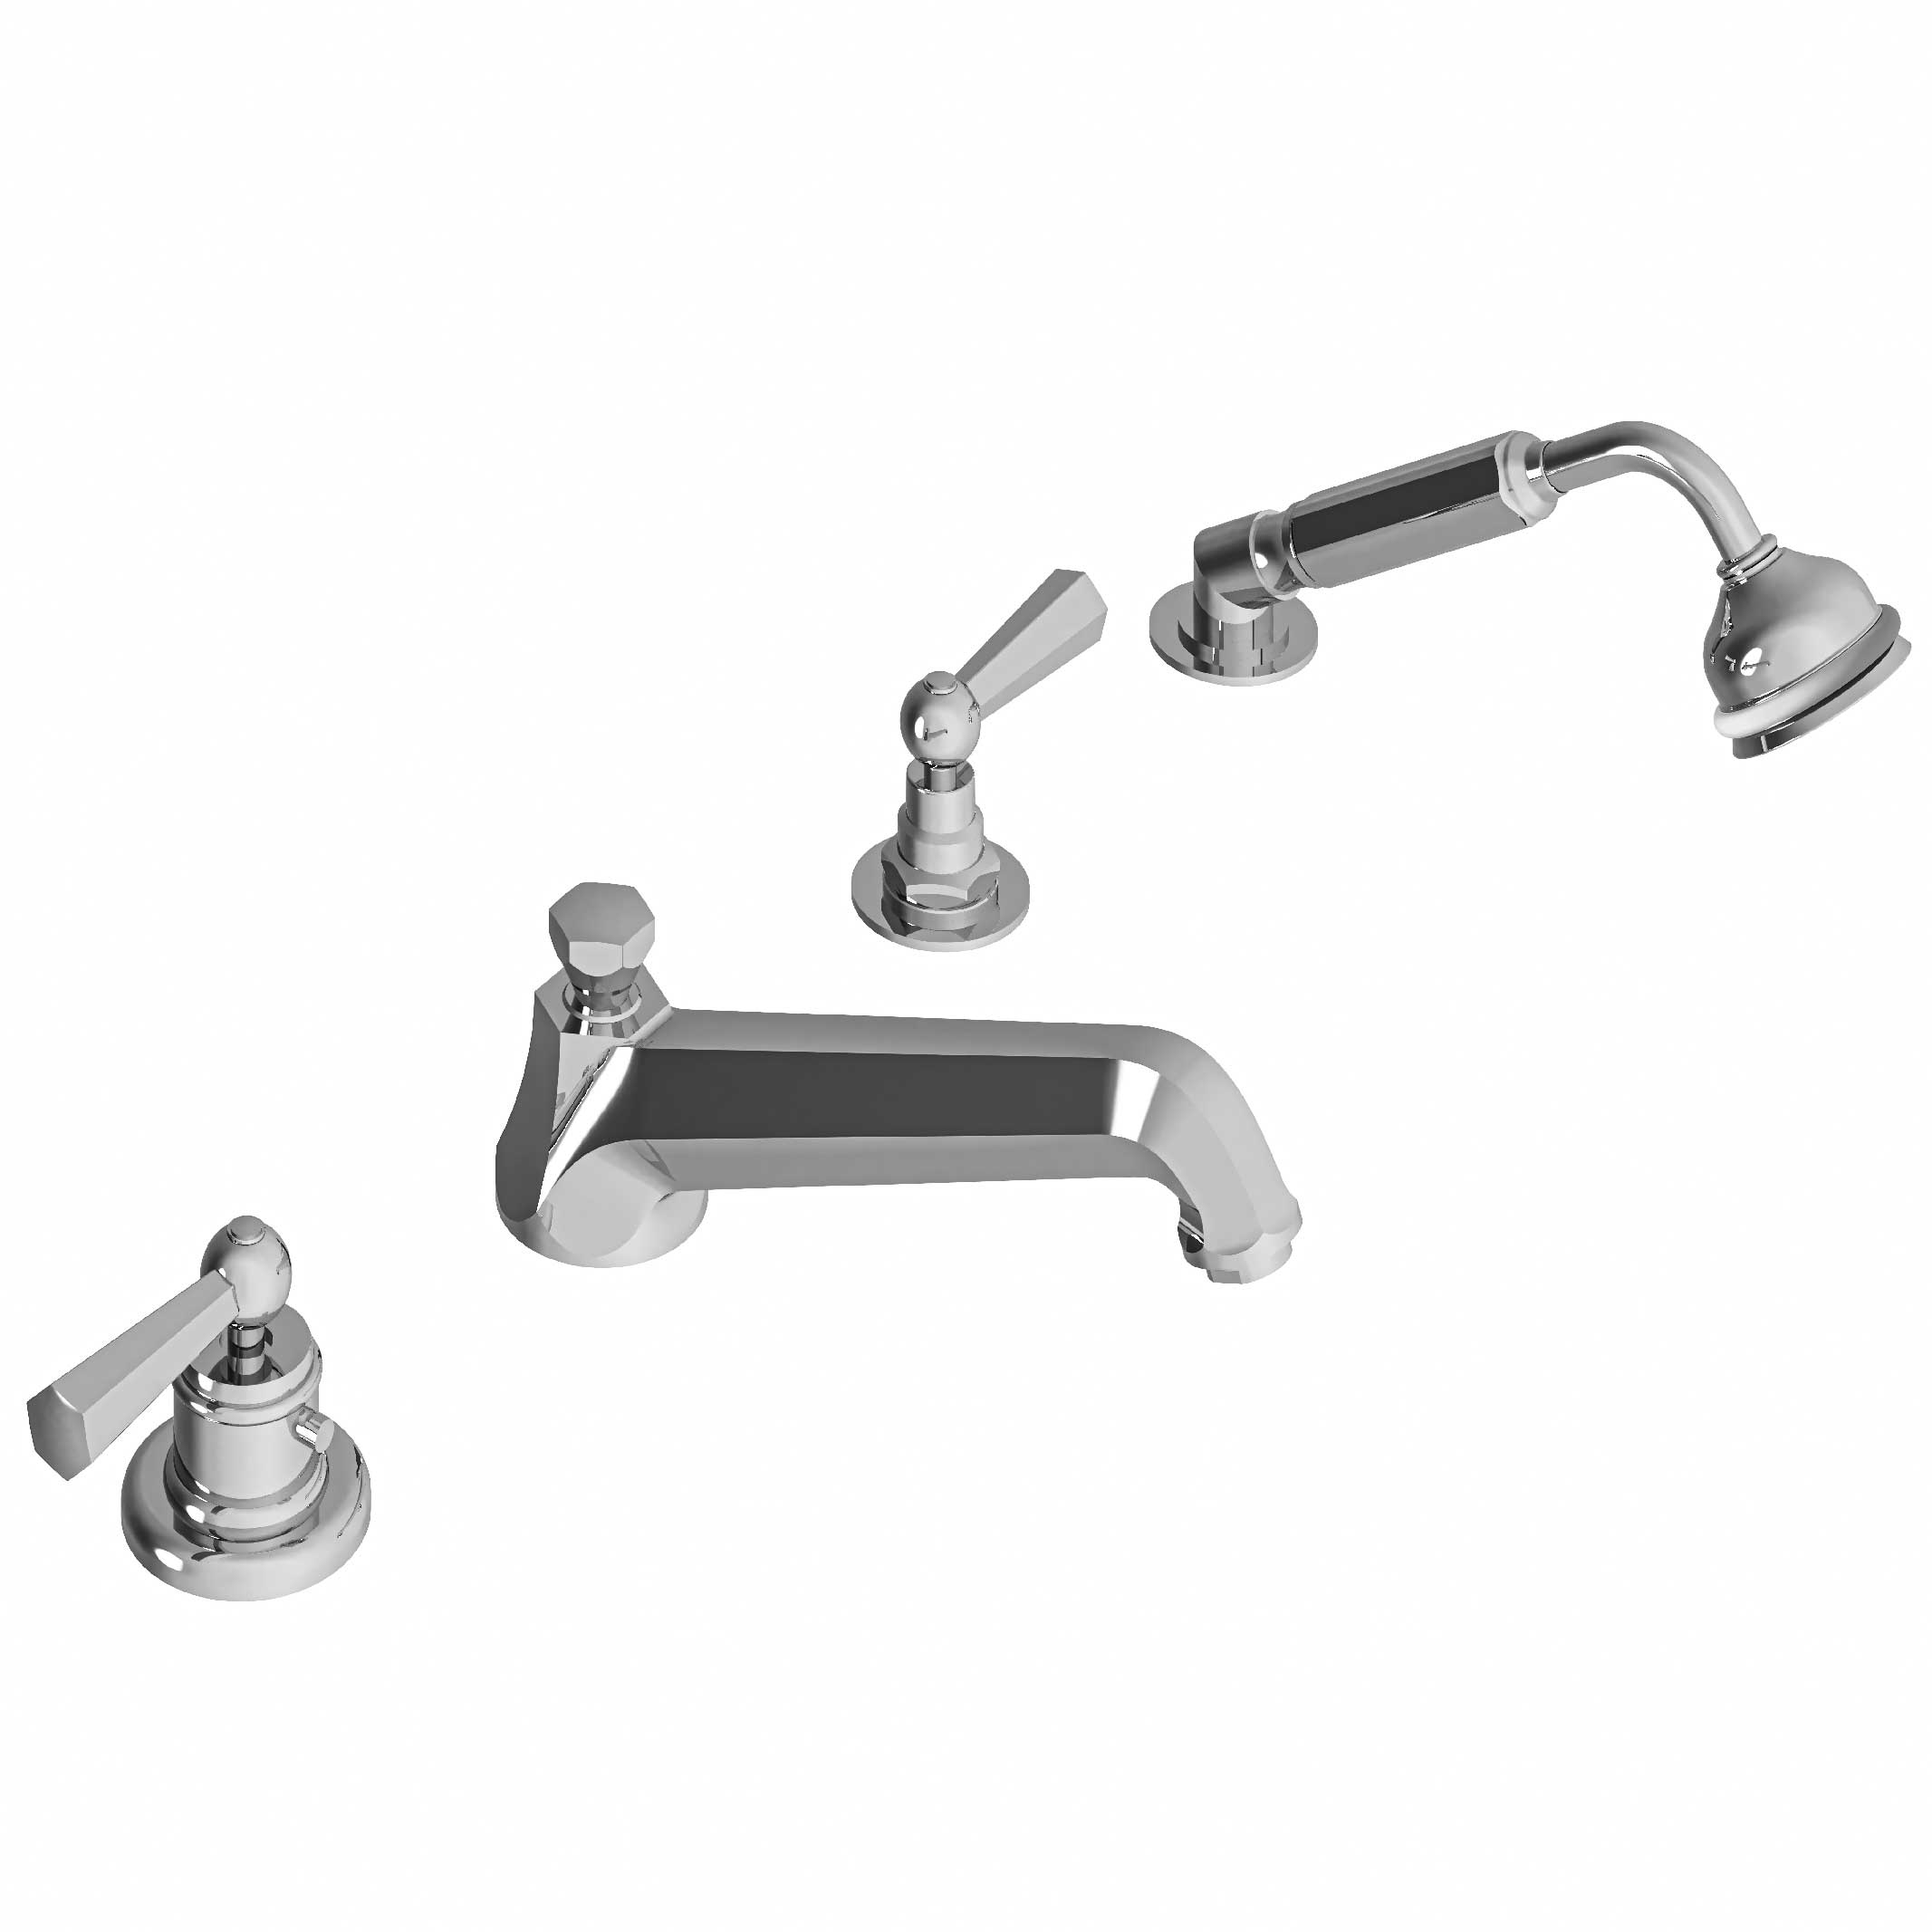 M39-3304T 4-hole bath and shower thermo. mixer